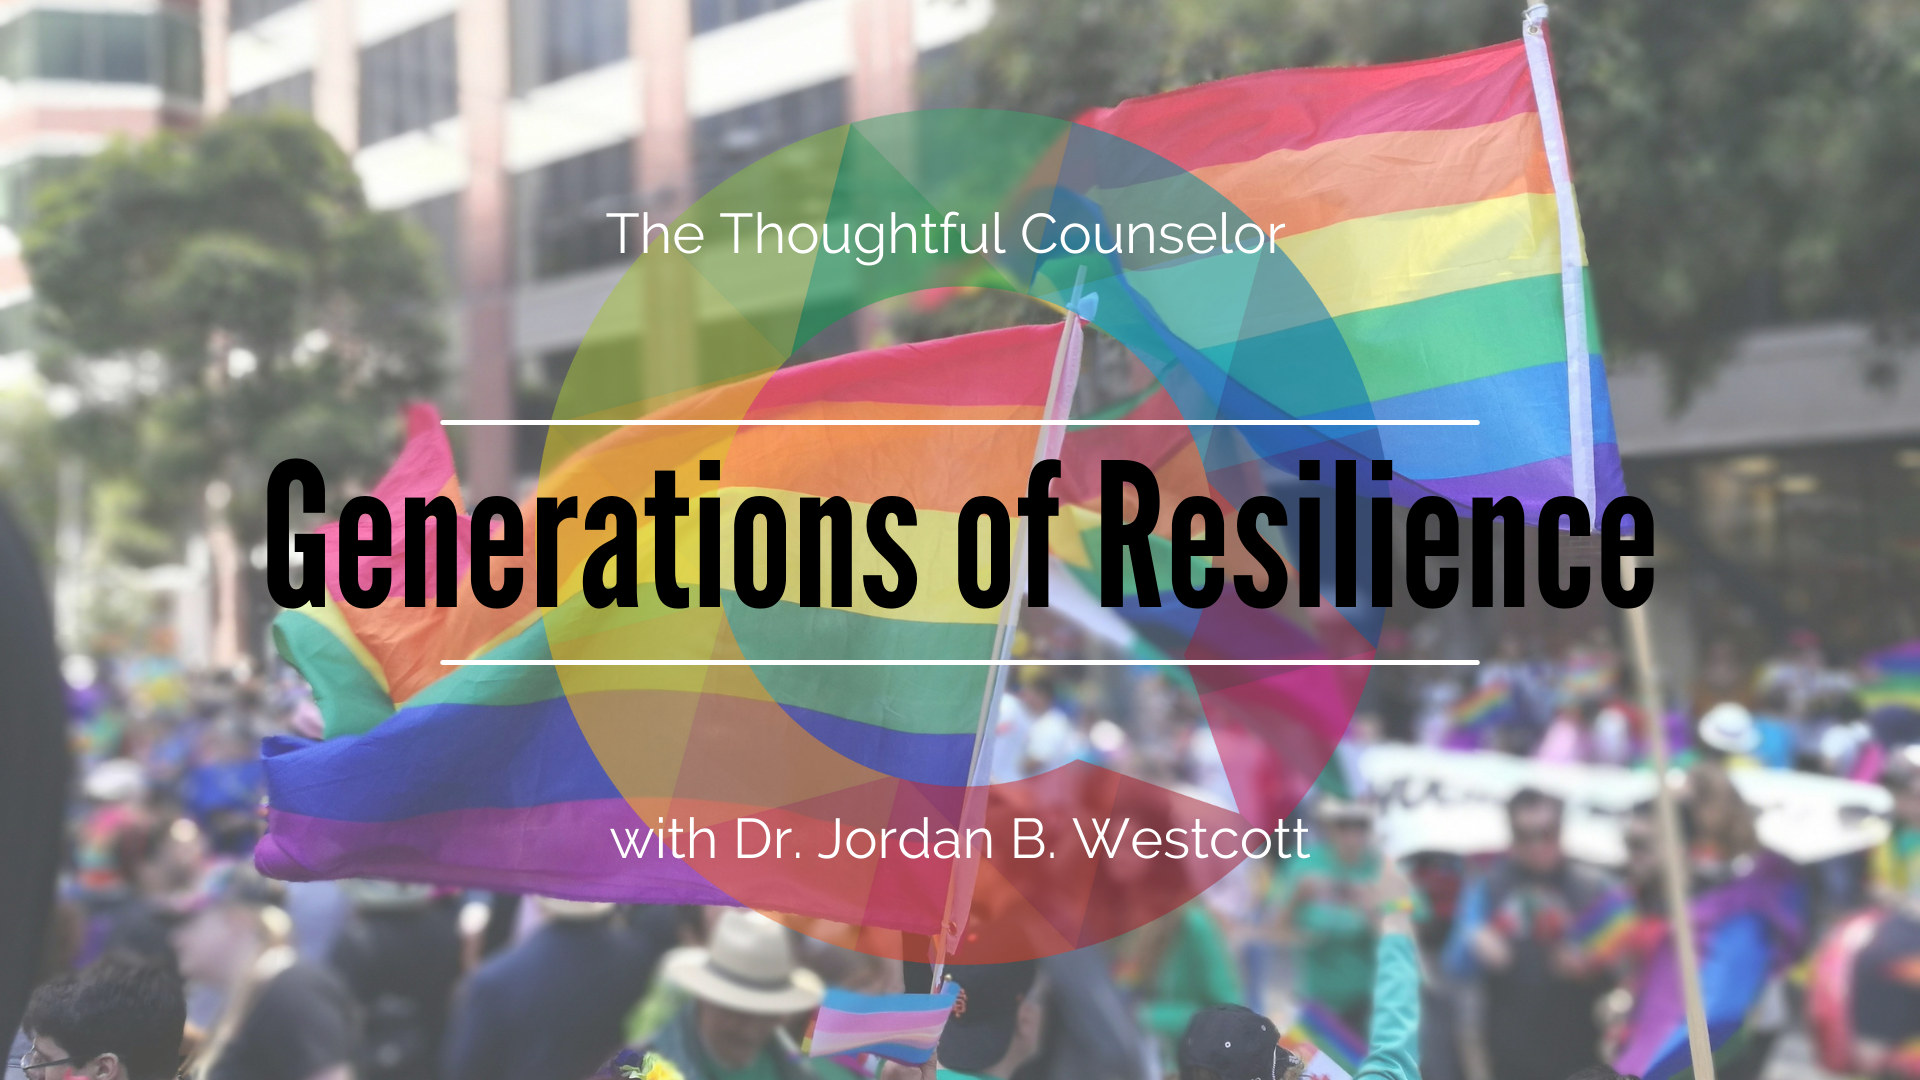 Generations of Resilience: Counseling LGBTQ+ Older Adults